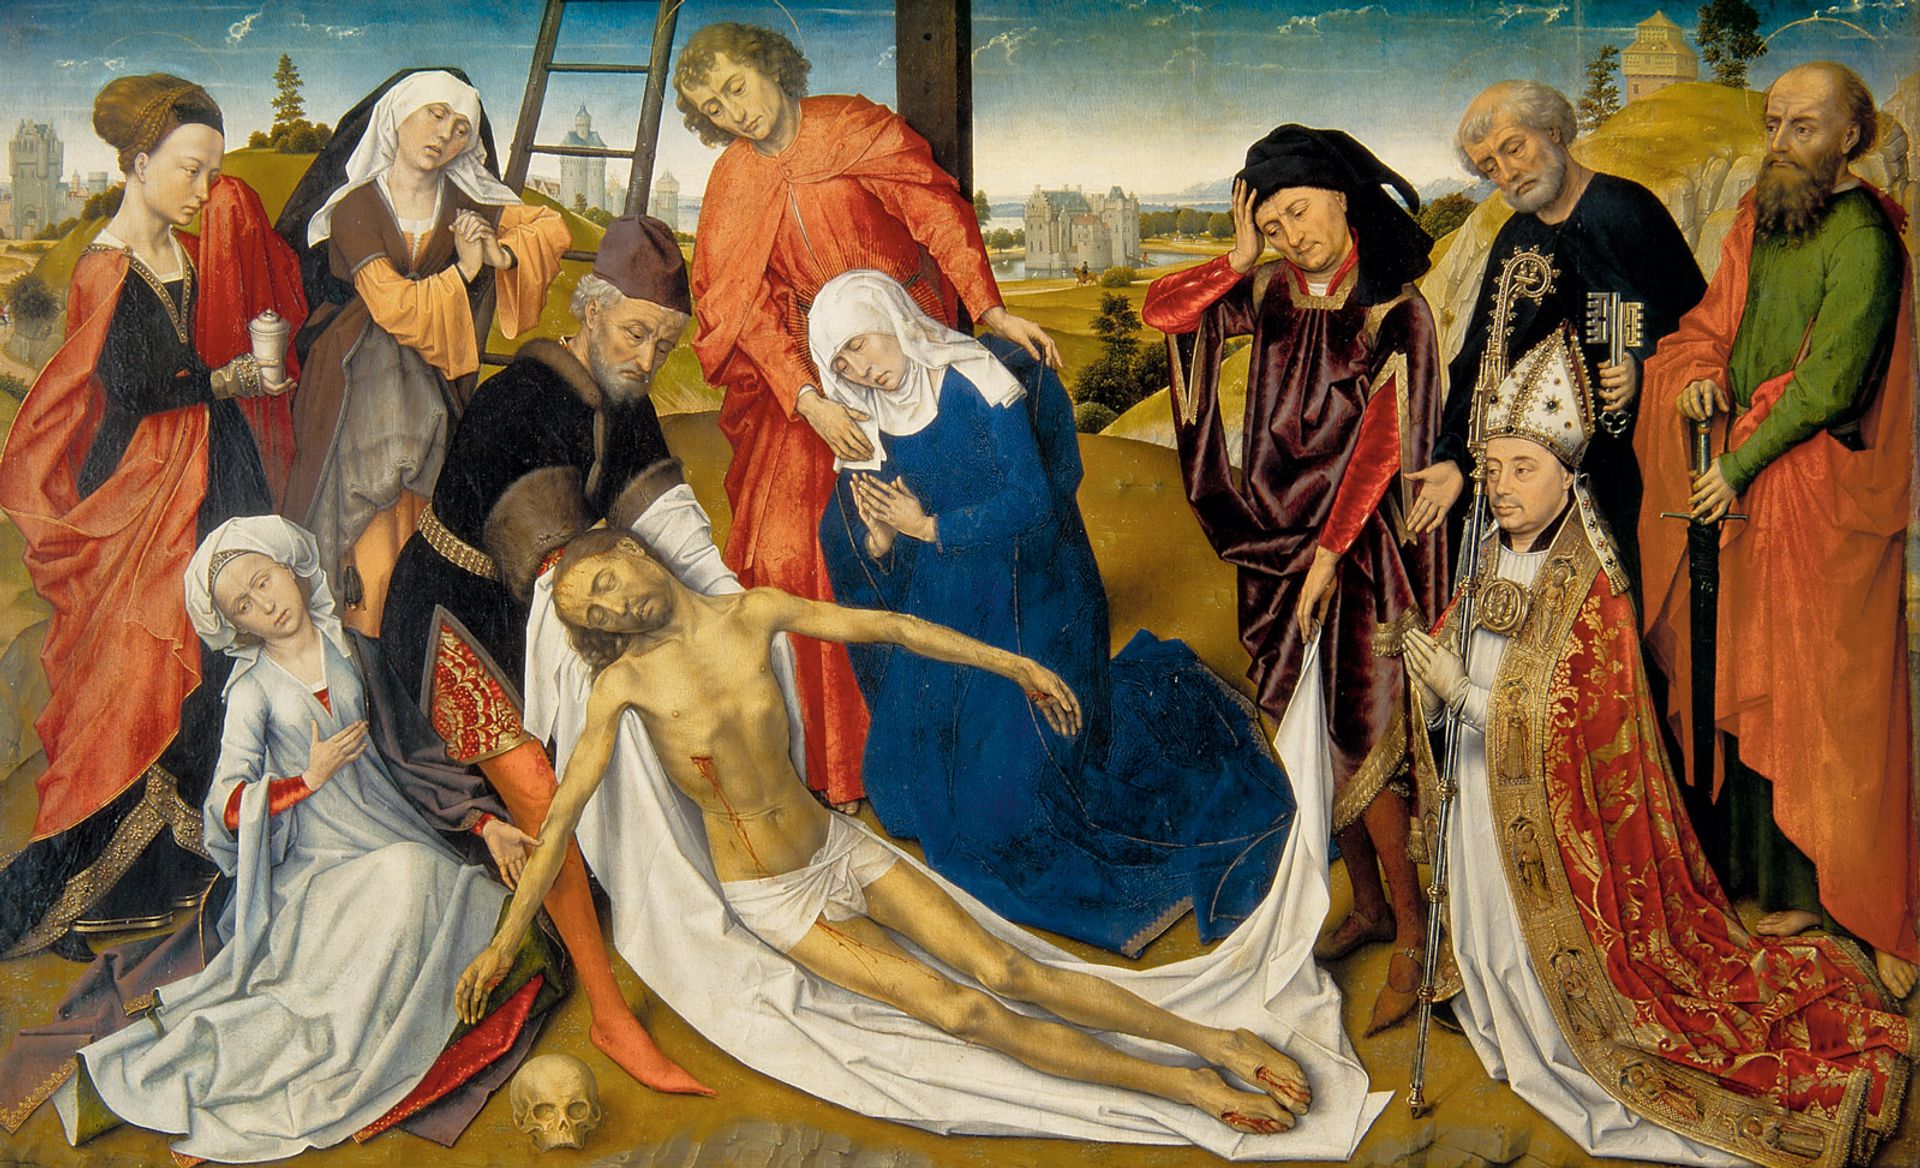 Experts want to establish how much  of The Lamentation of Christ (1460-64) was made by the artist’s studio Mauritshuis